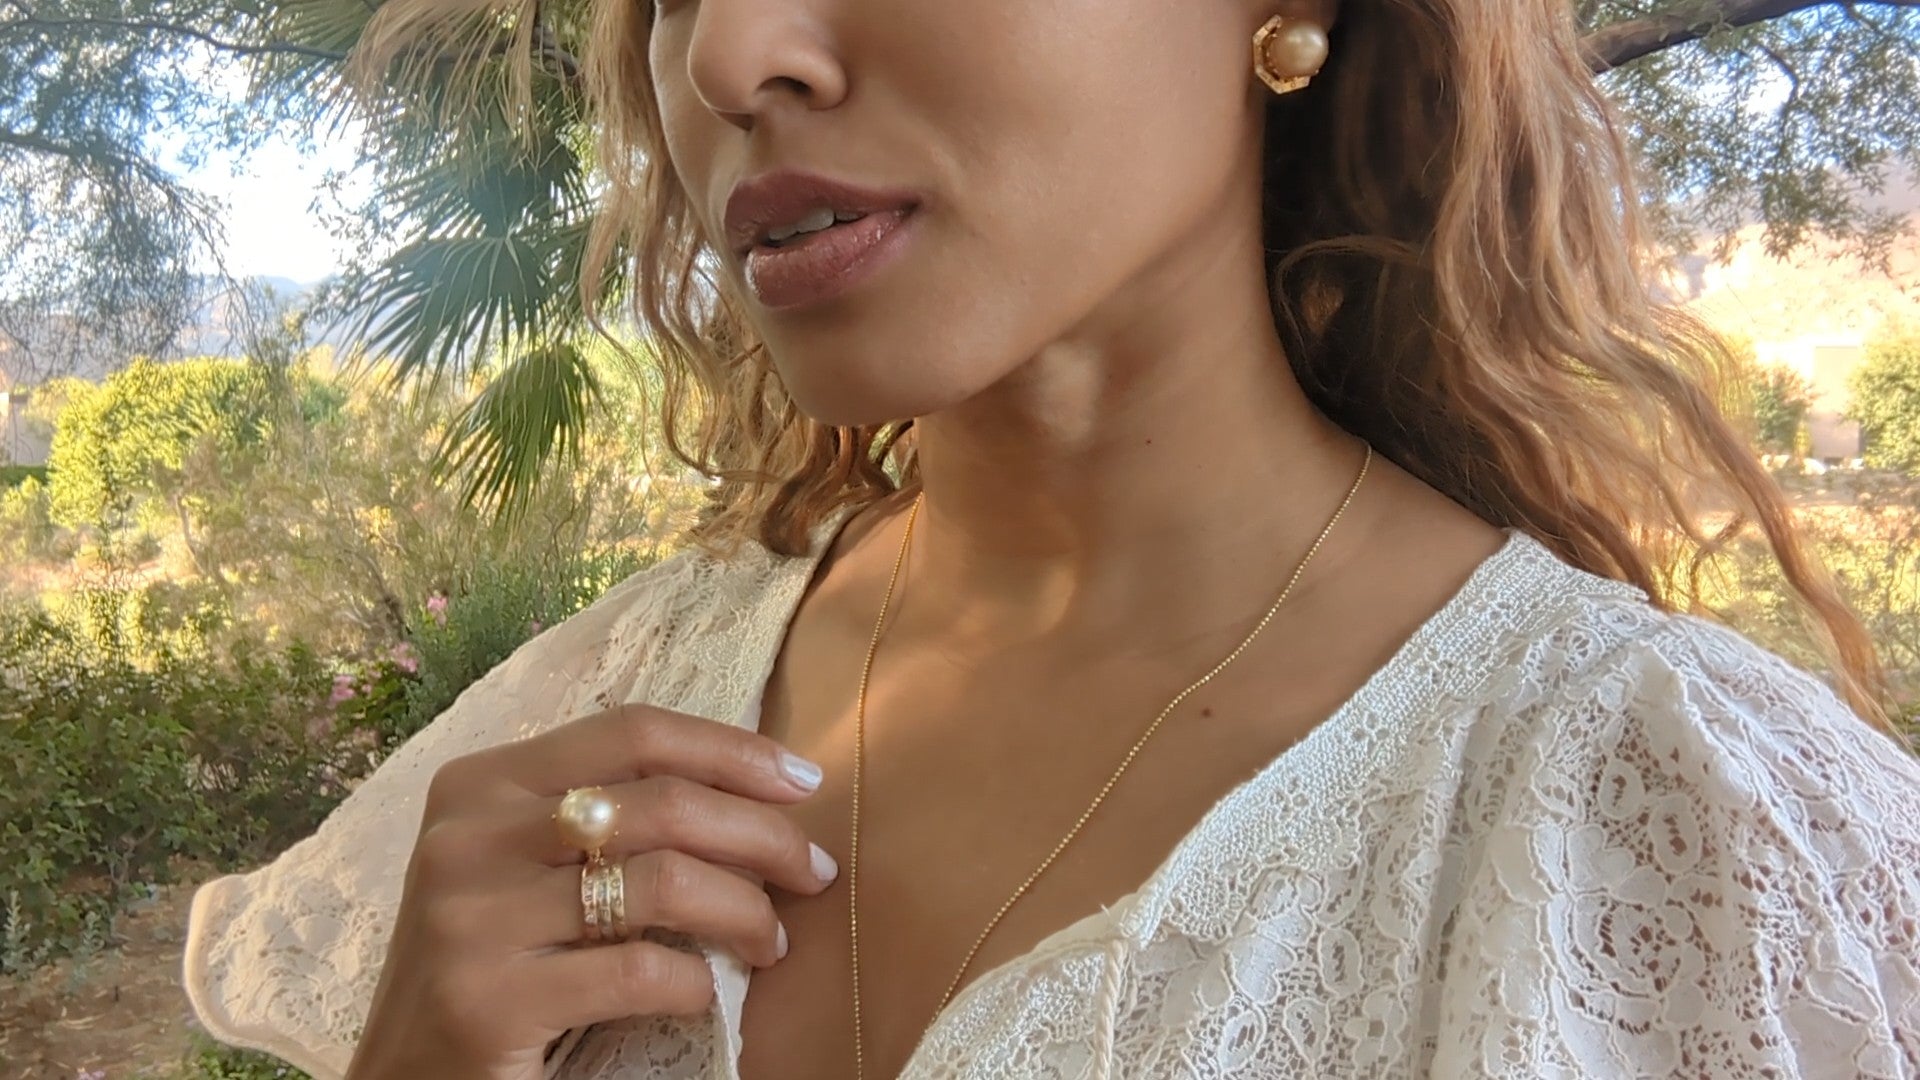 black woman smiling in garden wearing white dress and smiling while wearing the Large oversized South sea pearl diamond ring from the wandering jewel